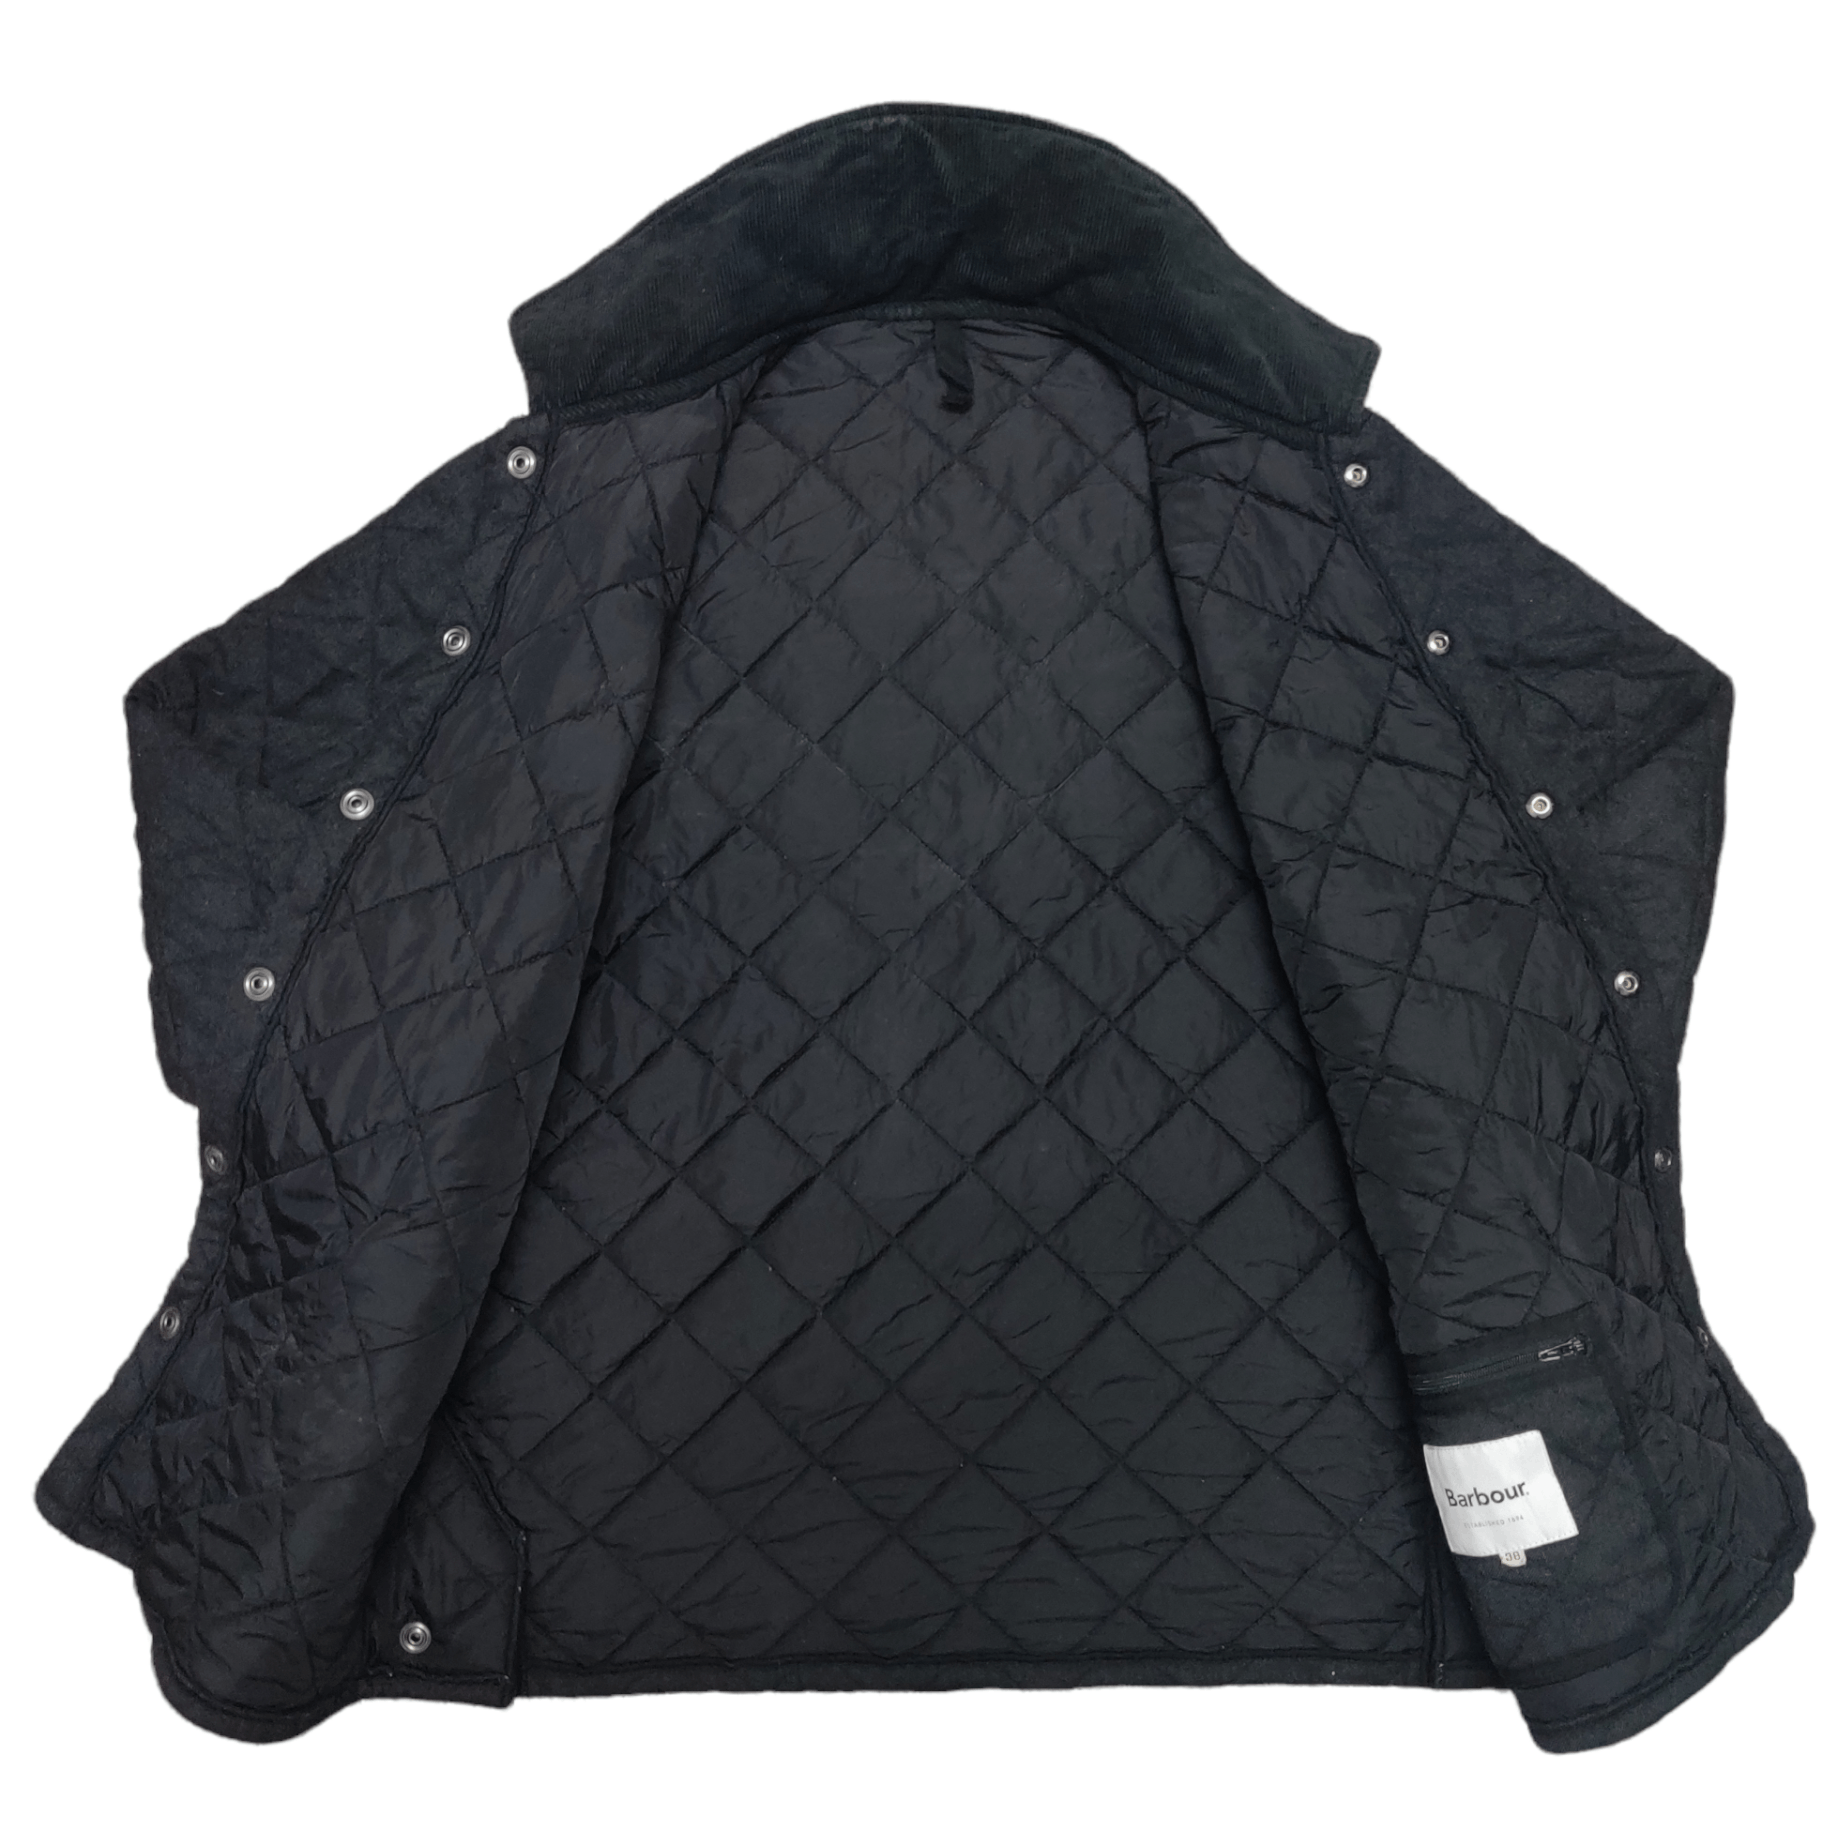 Barbour Quilted Jacket - 6